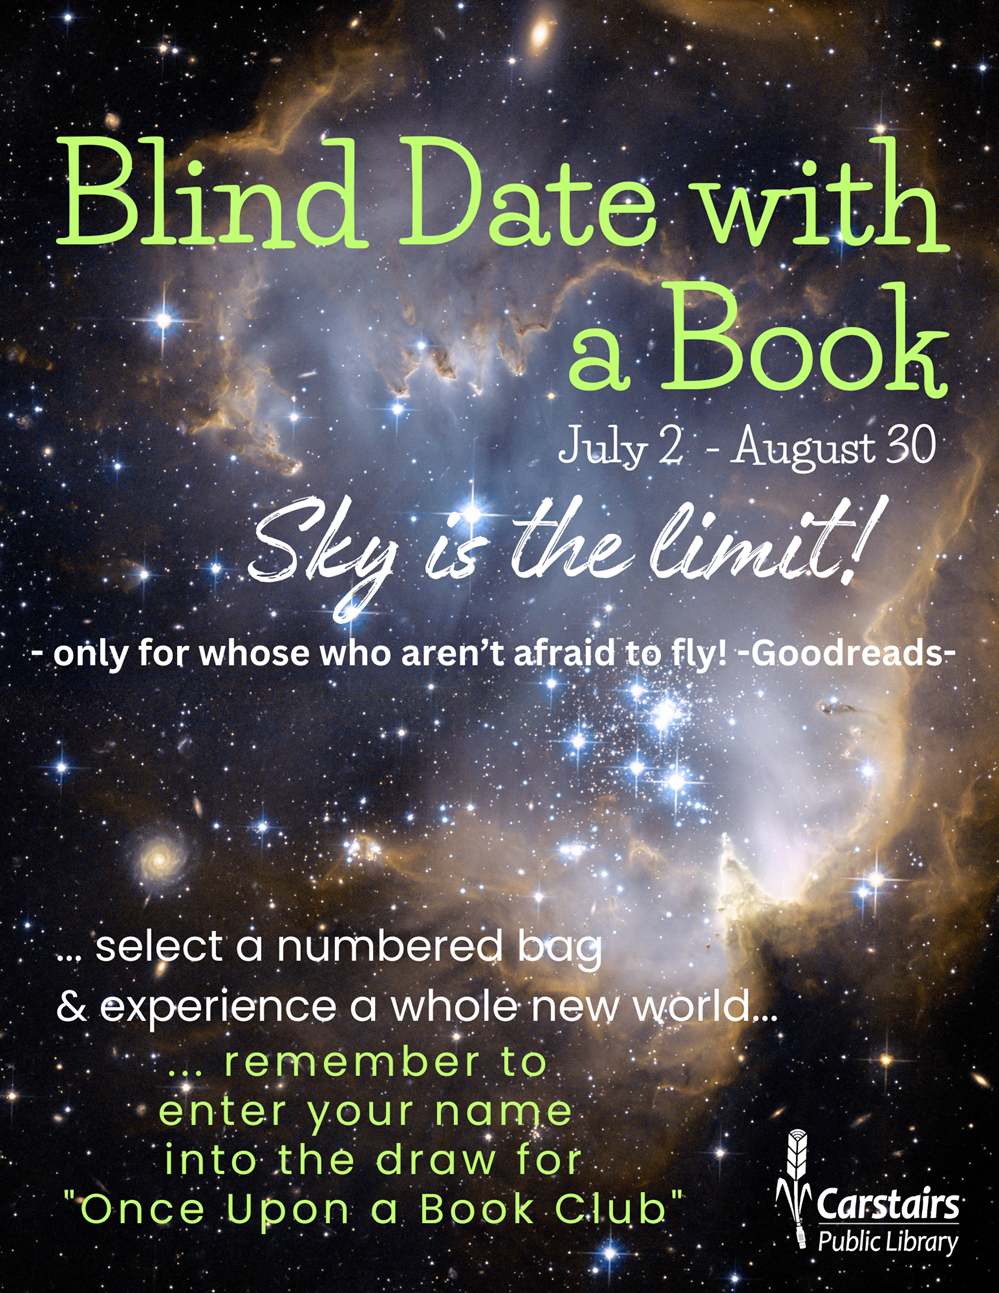 a sea of tiny white stars dot the void of space. golden nebula clouds rest a top the beauty of space. the details of this years blind date with a book are written in white and light green text.